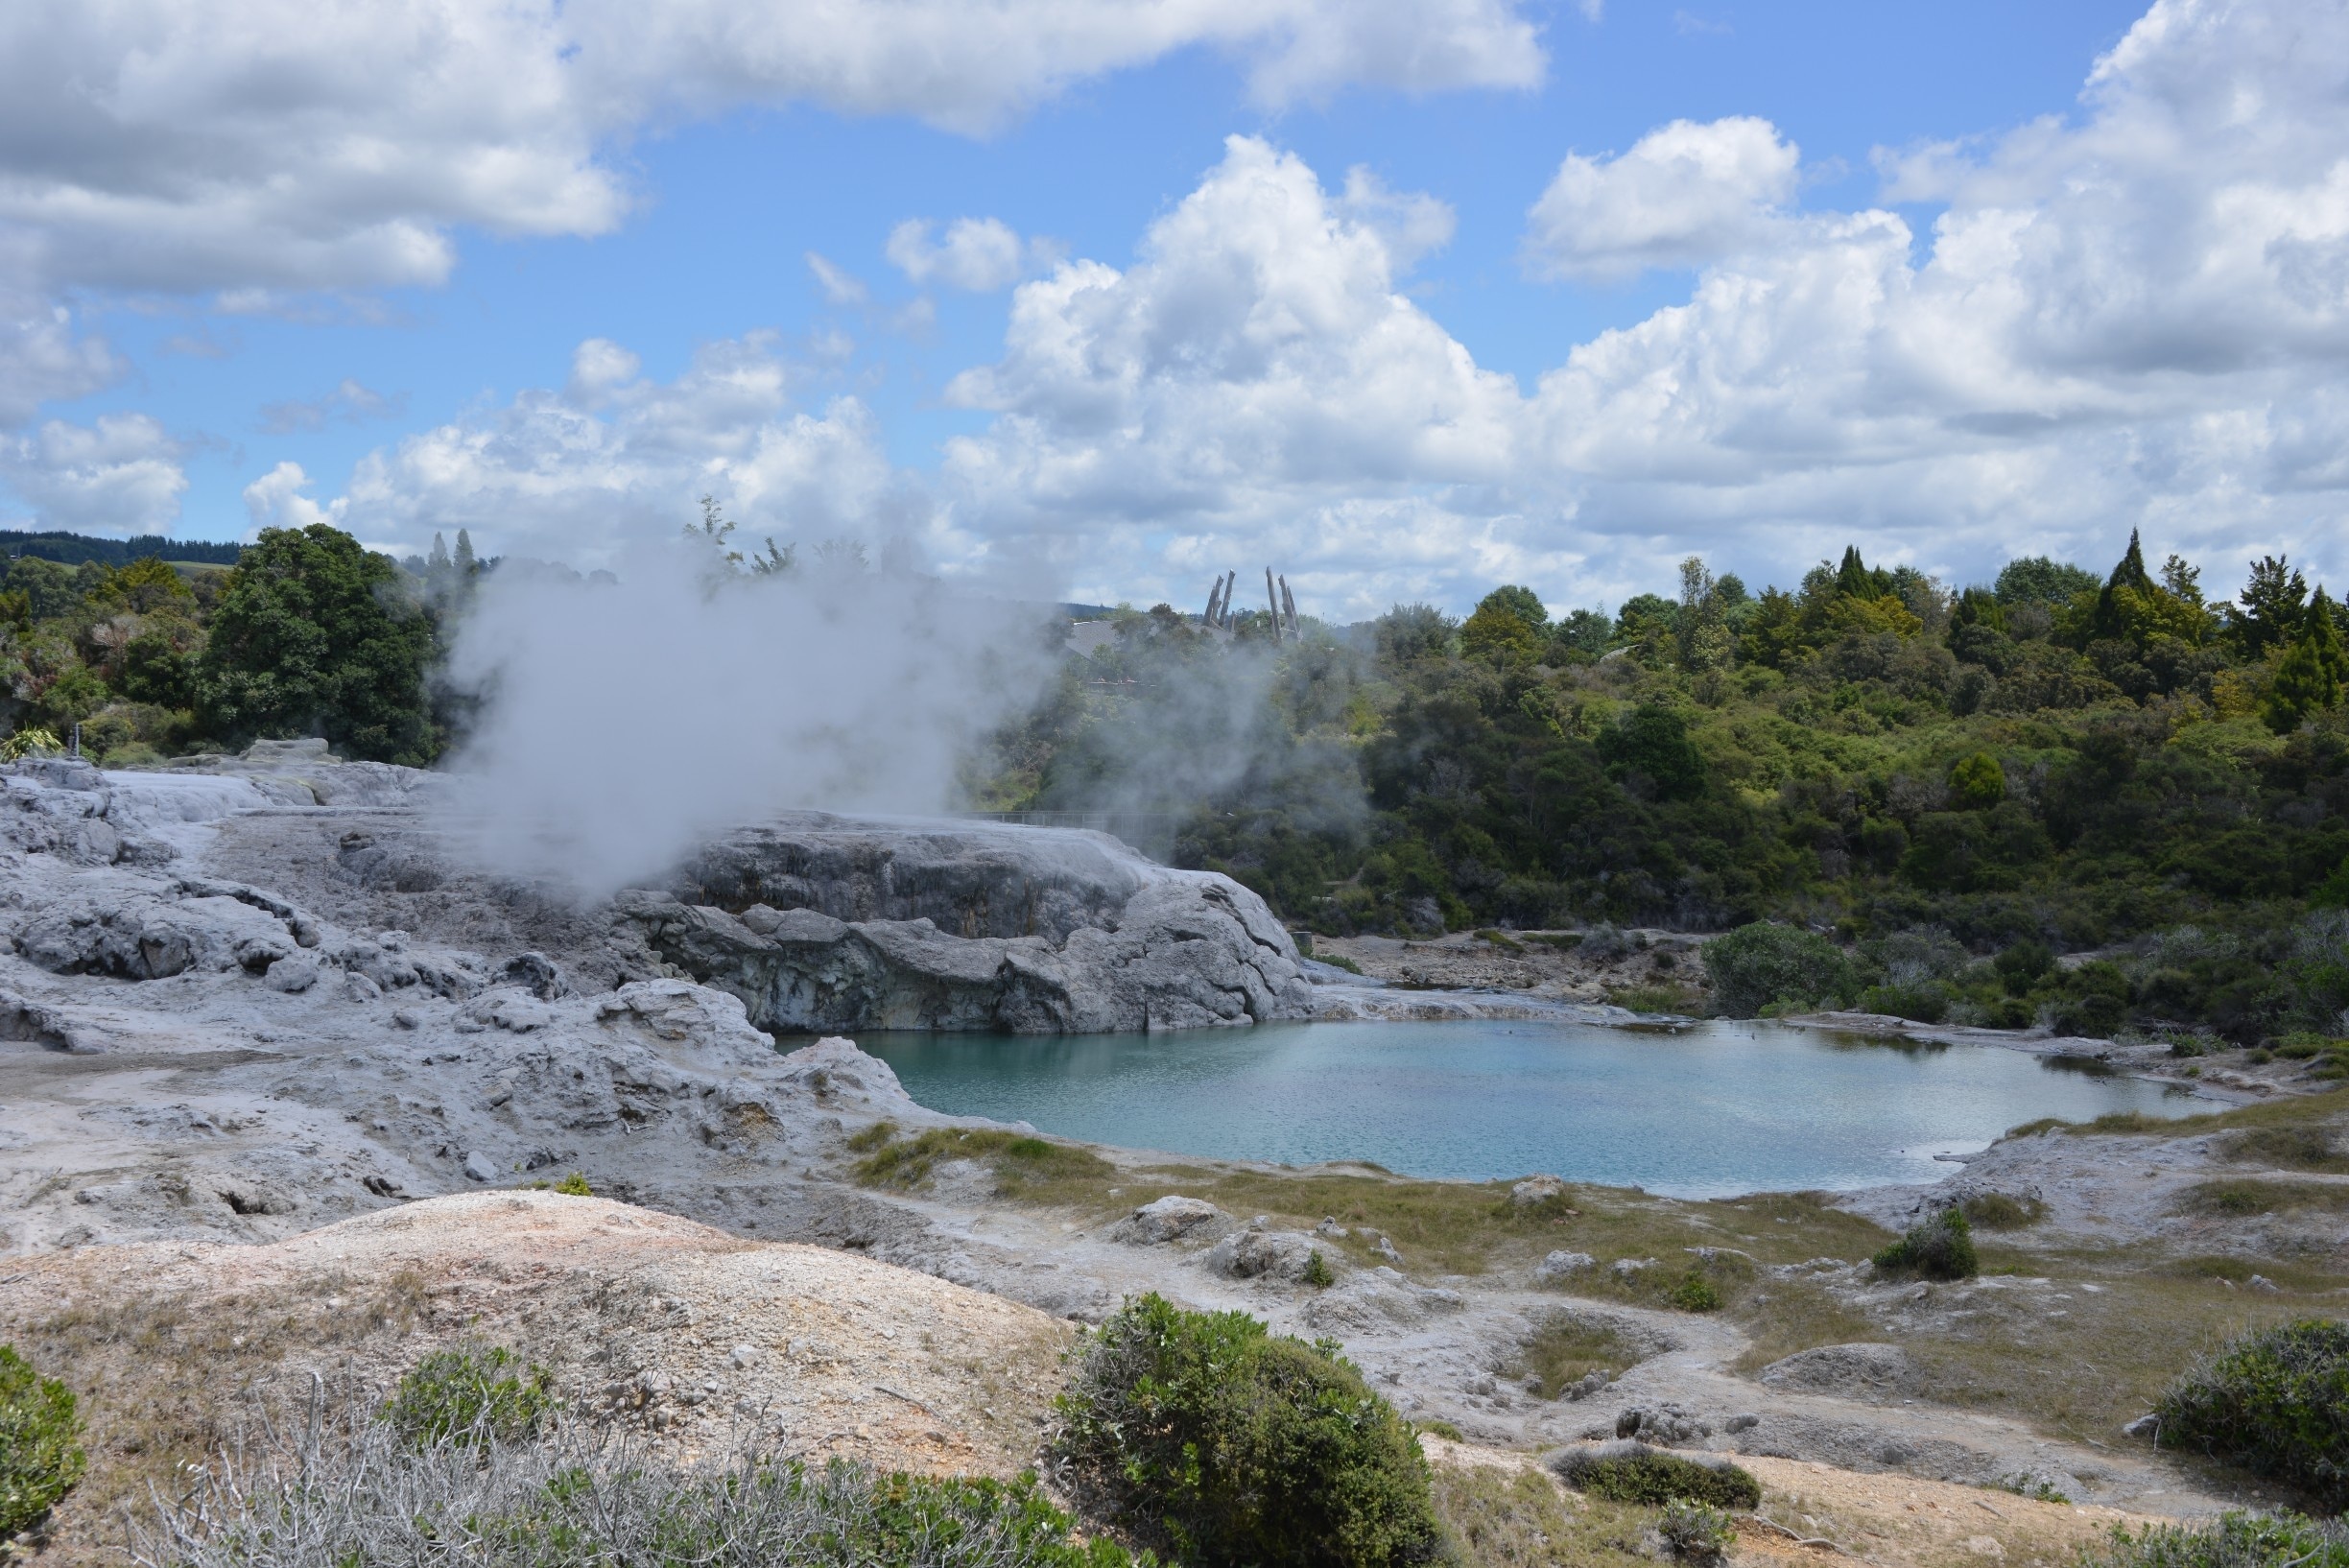 Amazing sight, the hot springs in this traditional Maori village. Very smelly!